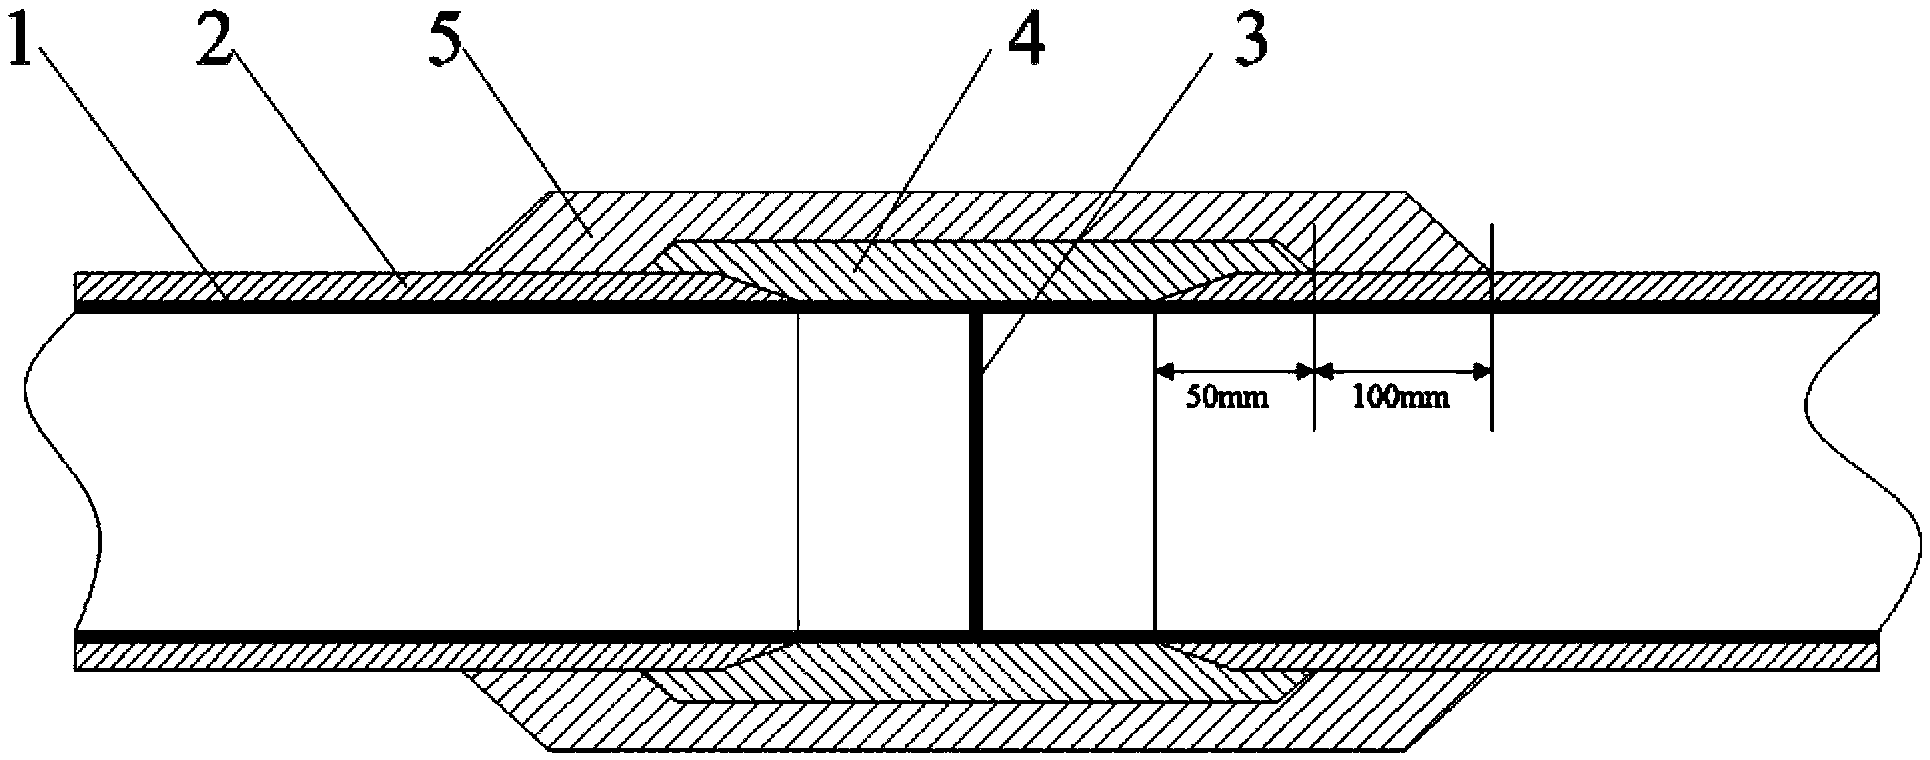 Joint coating repairing anticorrosion layer structure for in-service pipeline